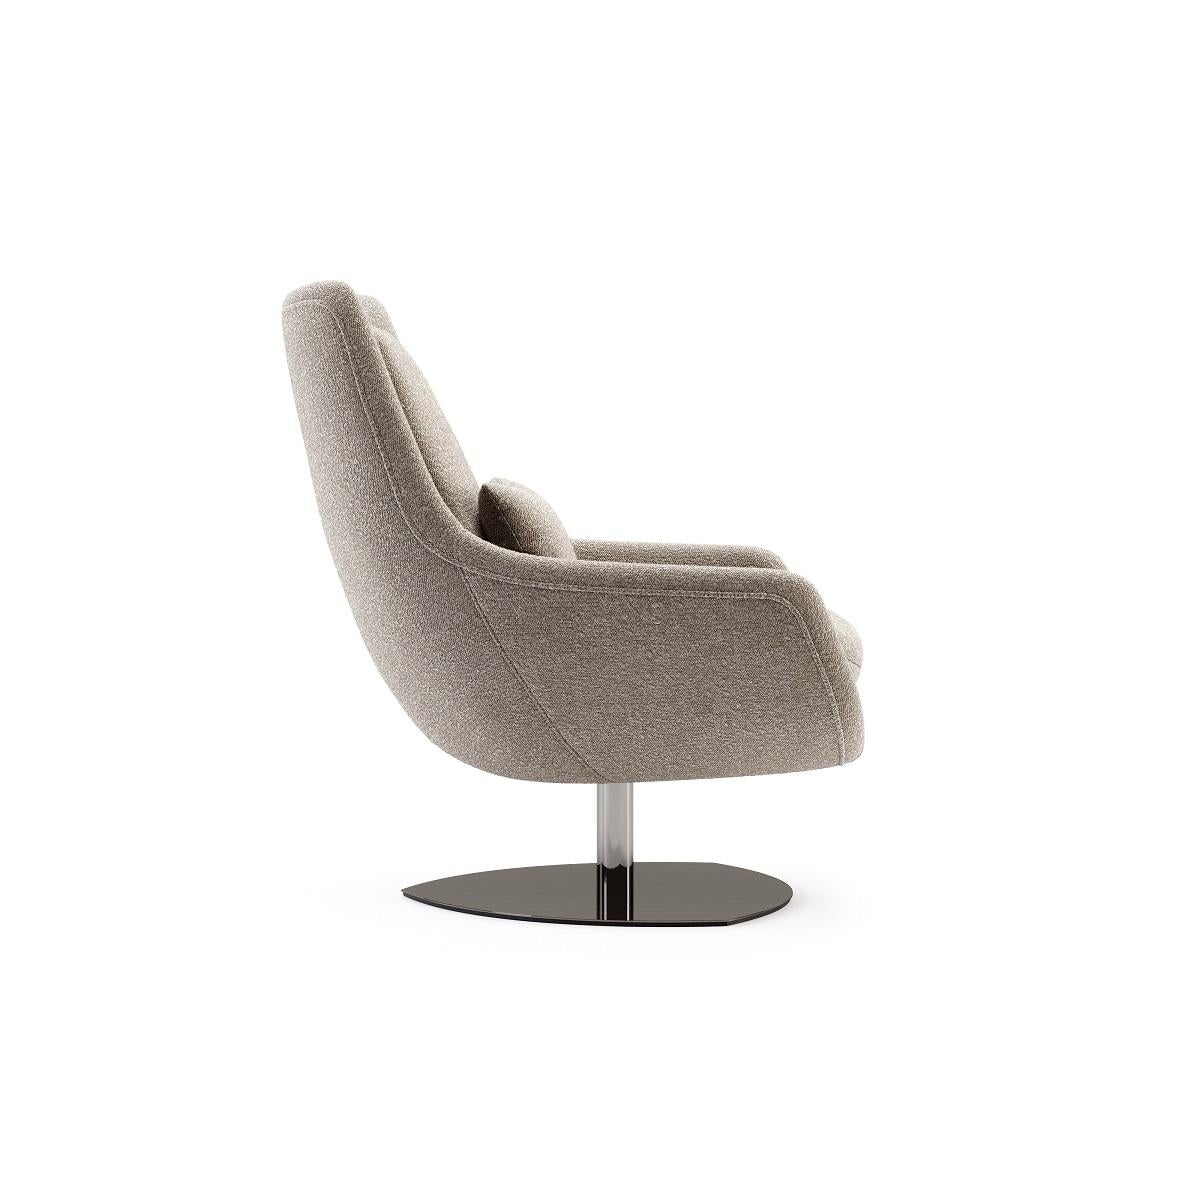 Swivel Armchair W Ottoman in Leather & Polished Stainless Steel 13